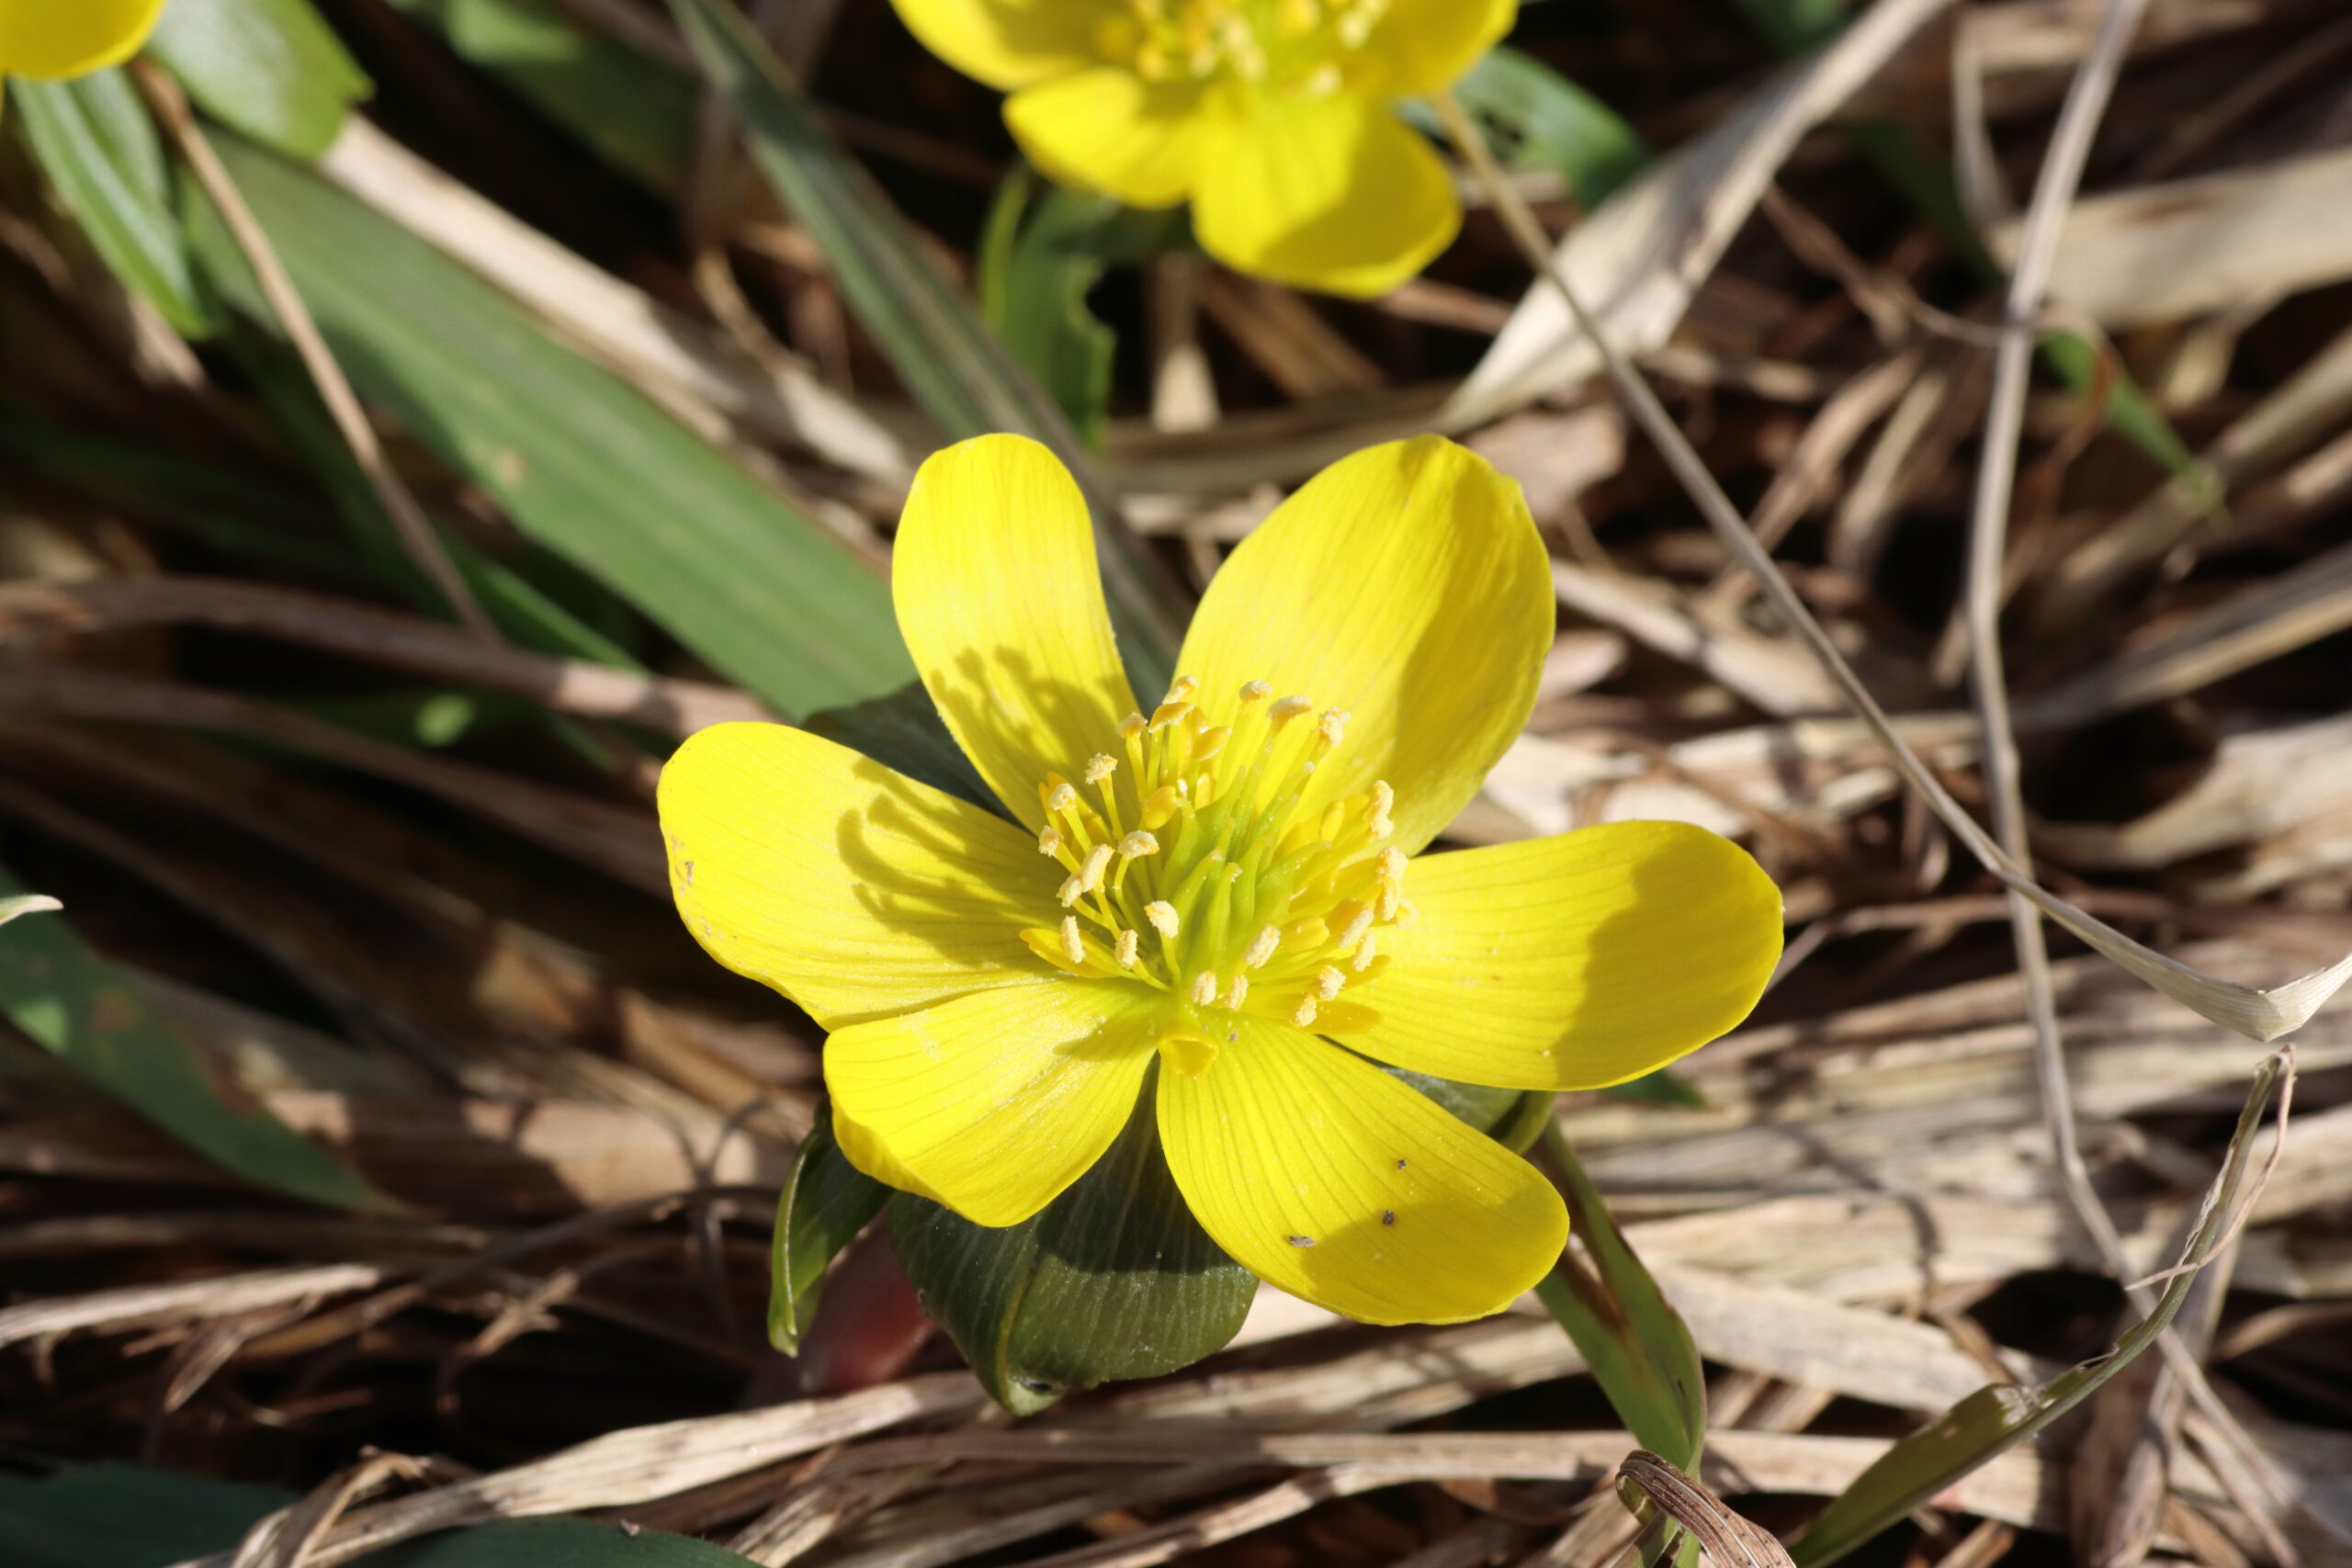 Winter aconite - yellow blossom in detail